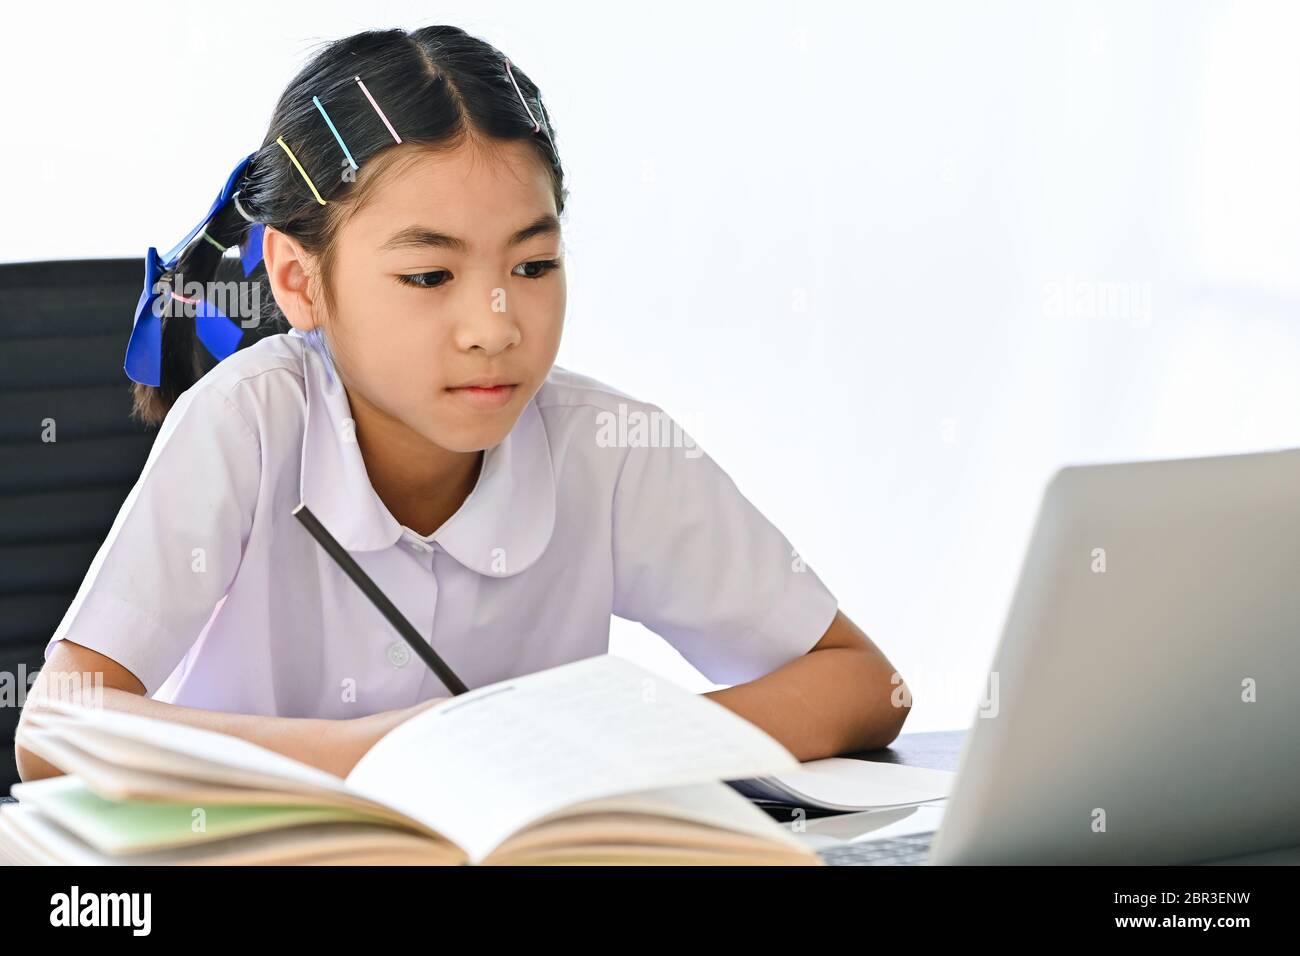 School girl in a uniform sitting near a laptop and looking at the screen leaning or exam with online e-learning teacher Stock Photo